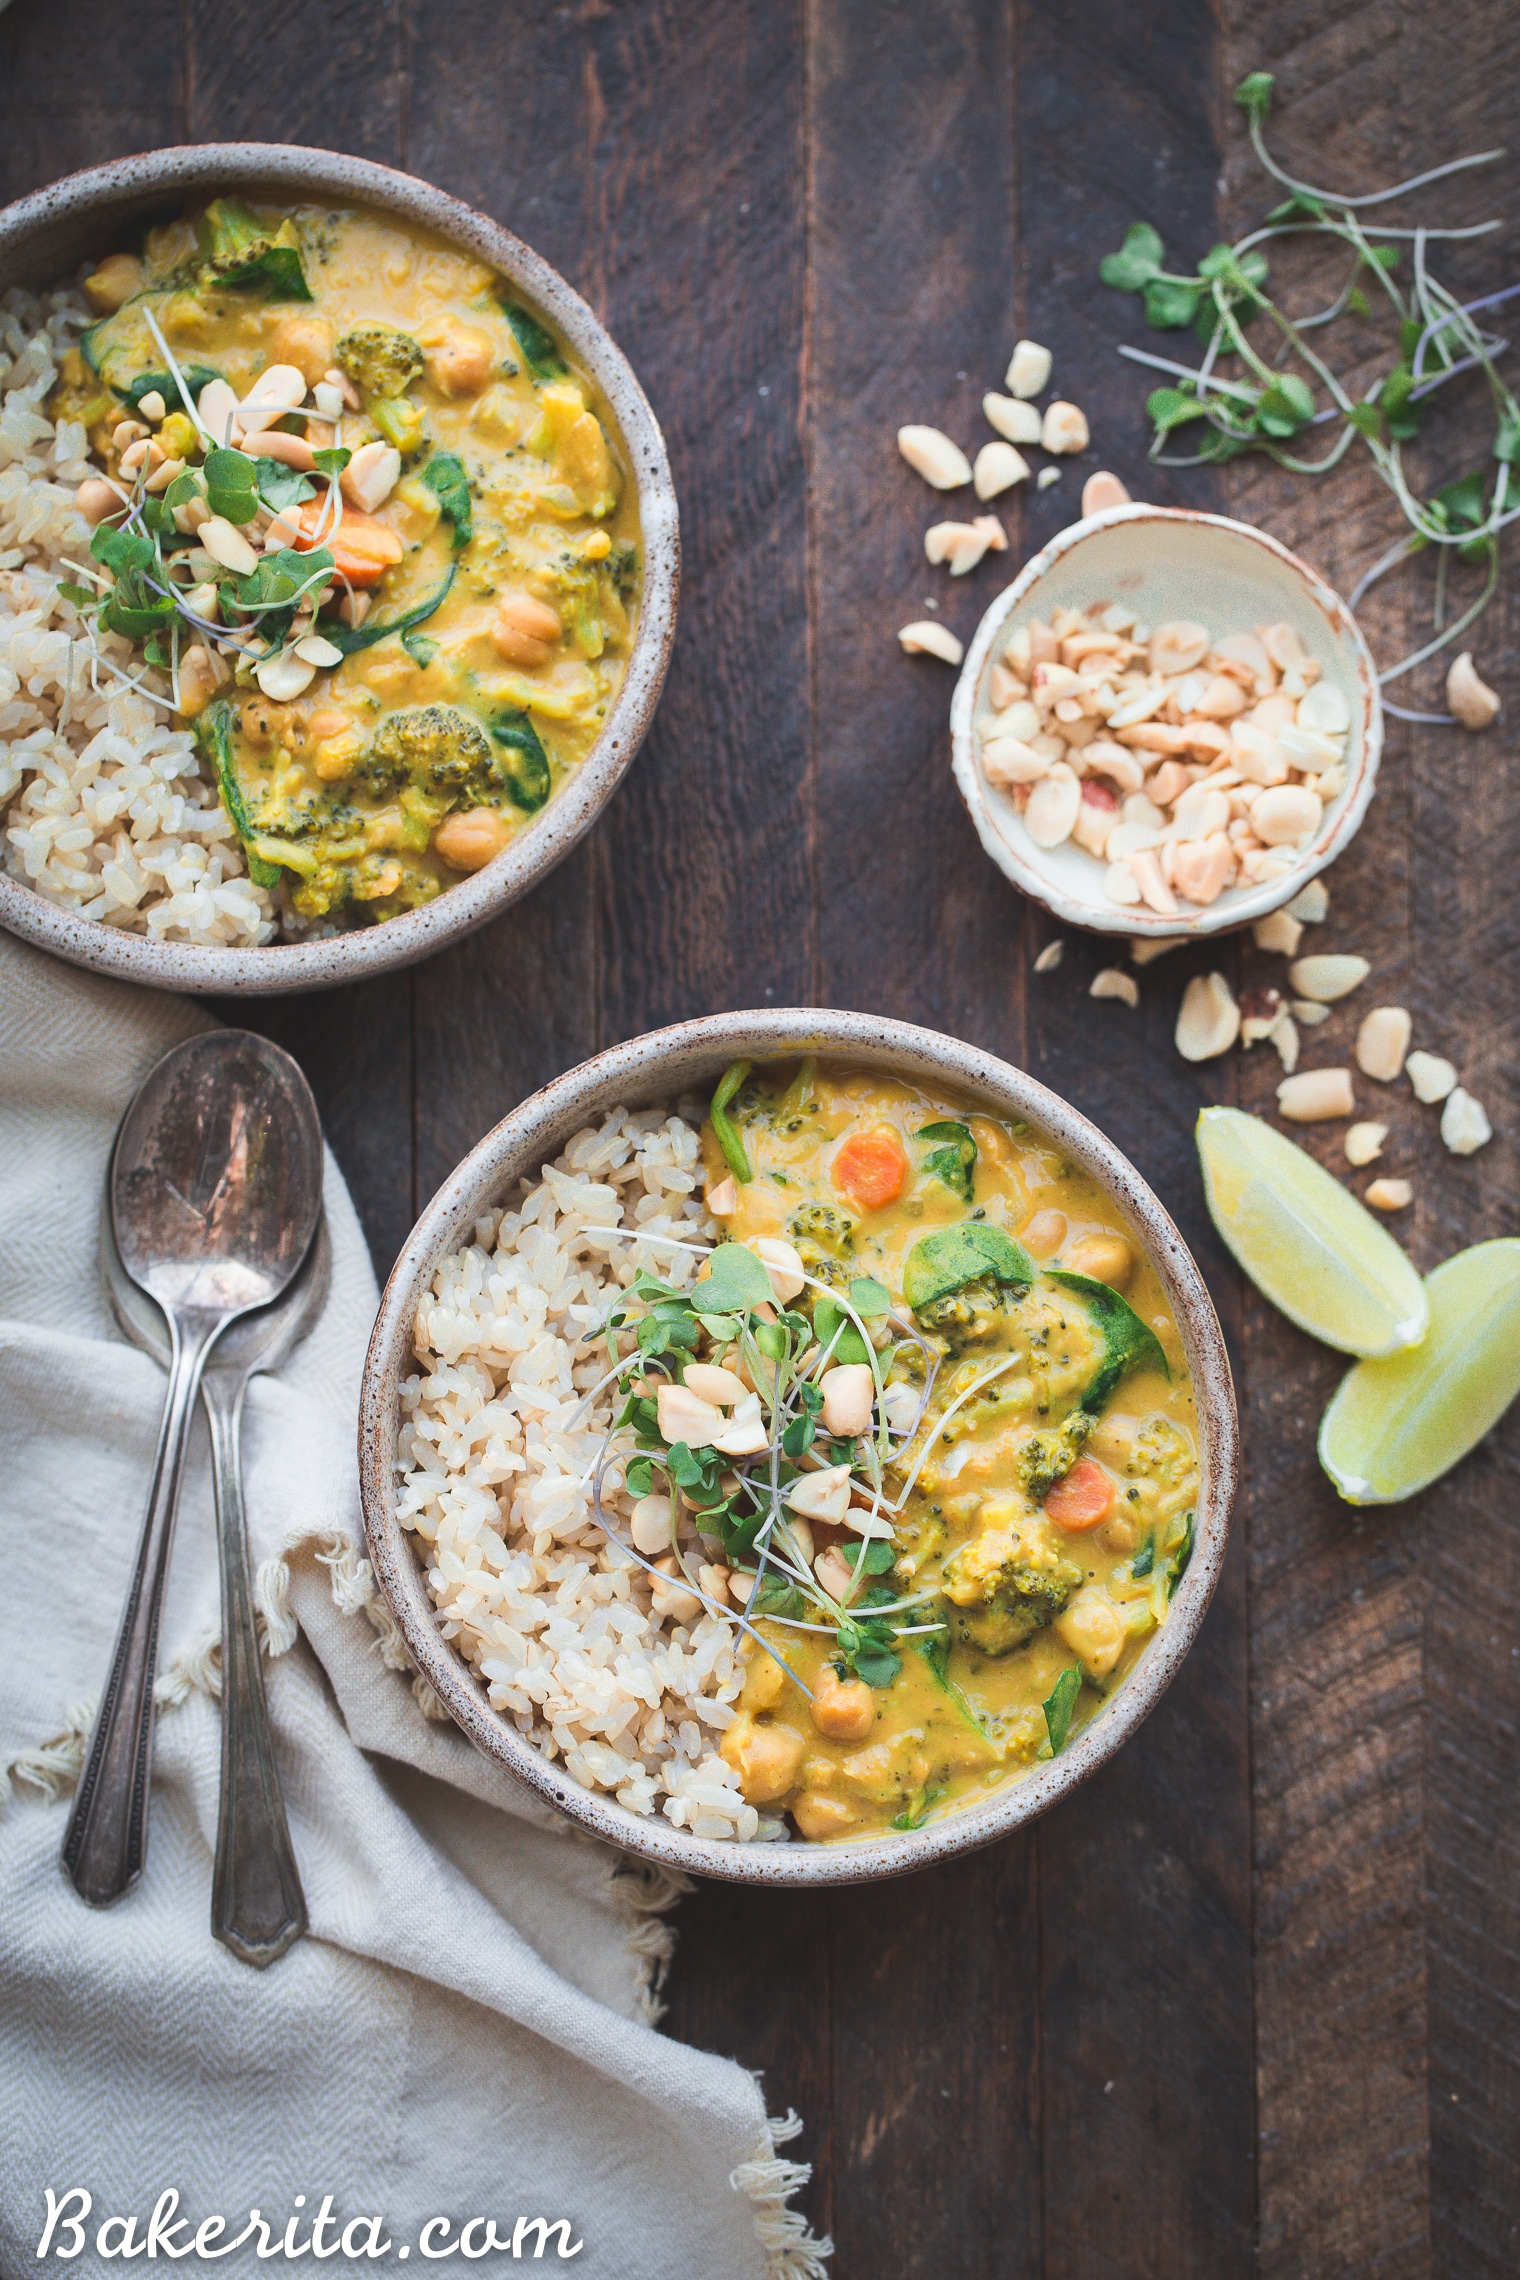 This Broccoli Chickpea Curry is a dinner staple that's so quick and easy to make! It's loaded with veggies and protein and has a secret ingredient to make it extra rich + creamy. It's gluten-free and vegan, too.